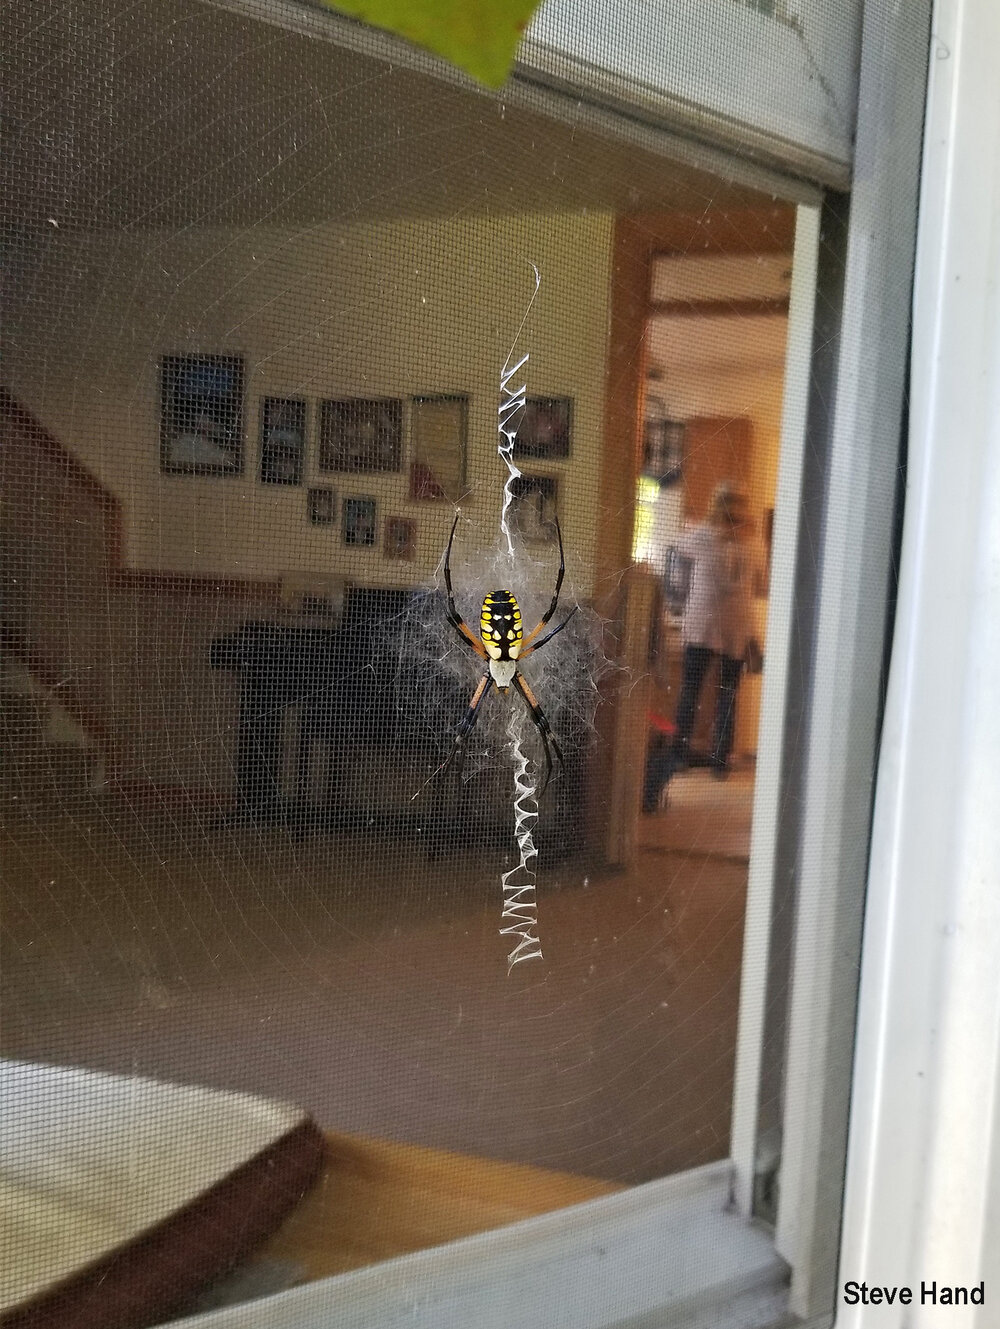 Black and yellow garden spiders can be quite entertaining when they spin their webs in windows. Notice the beautiful stabilimentum. Image credit: Steve Hand